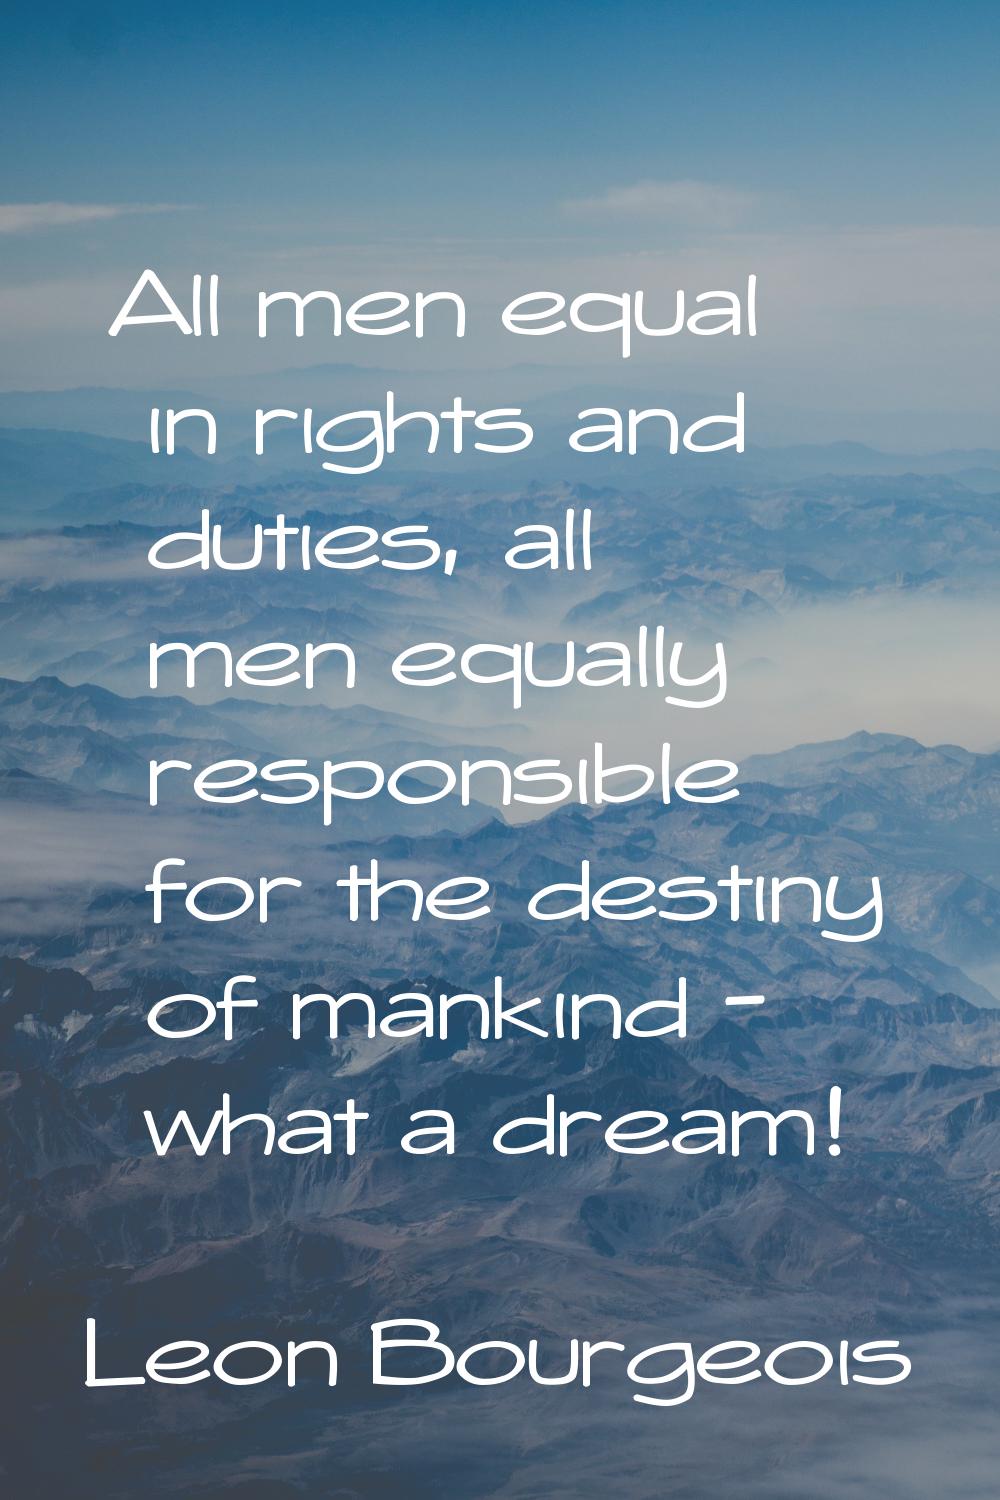 All men equal in rights and duties, all men equally responsible for the destiny of mankind - what a